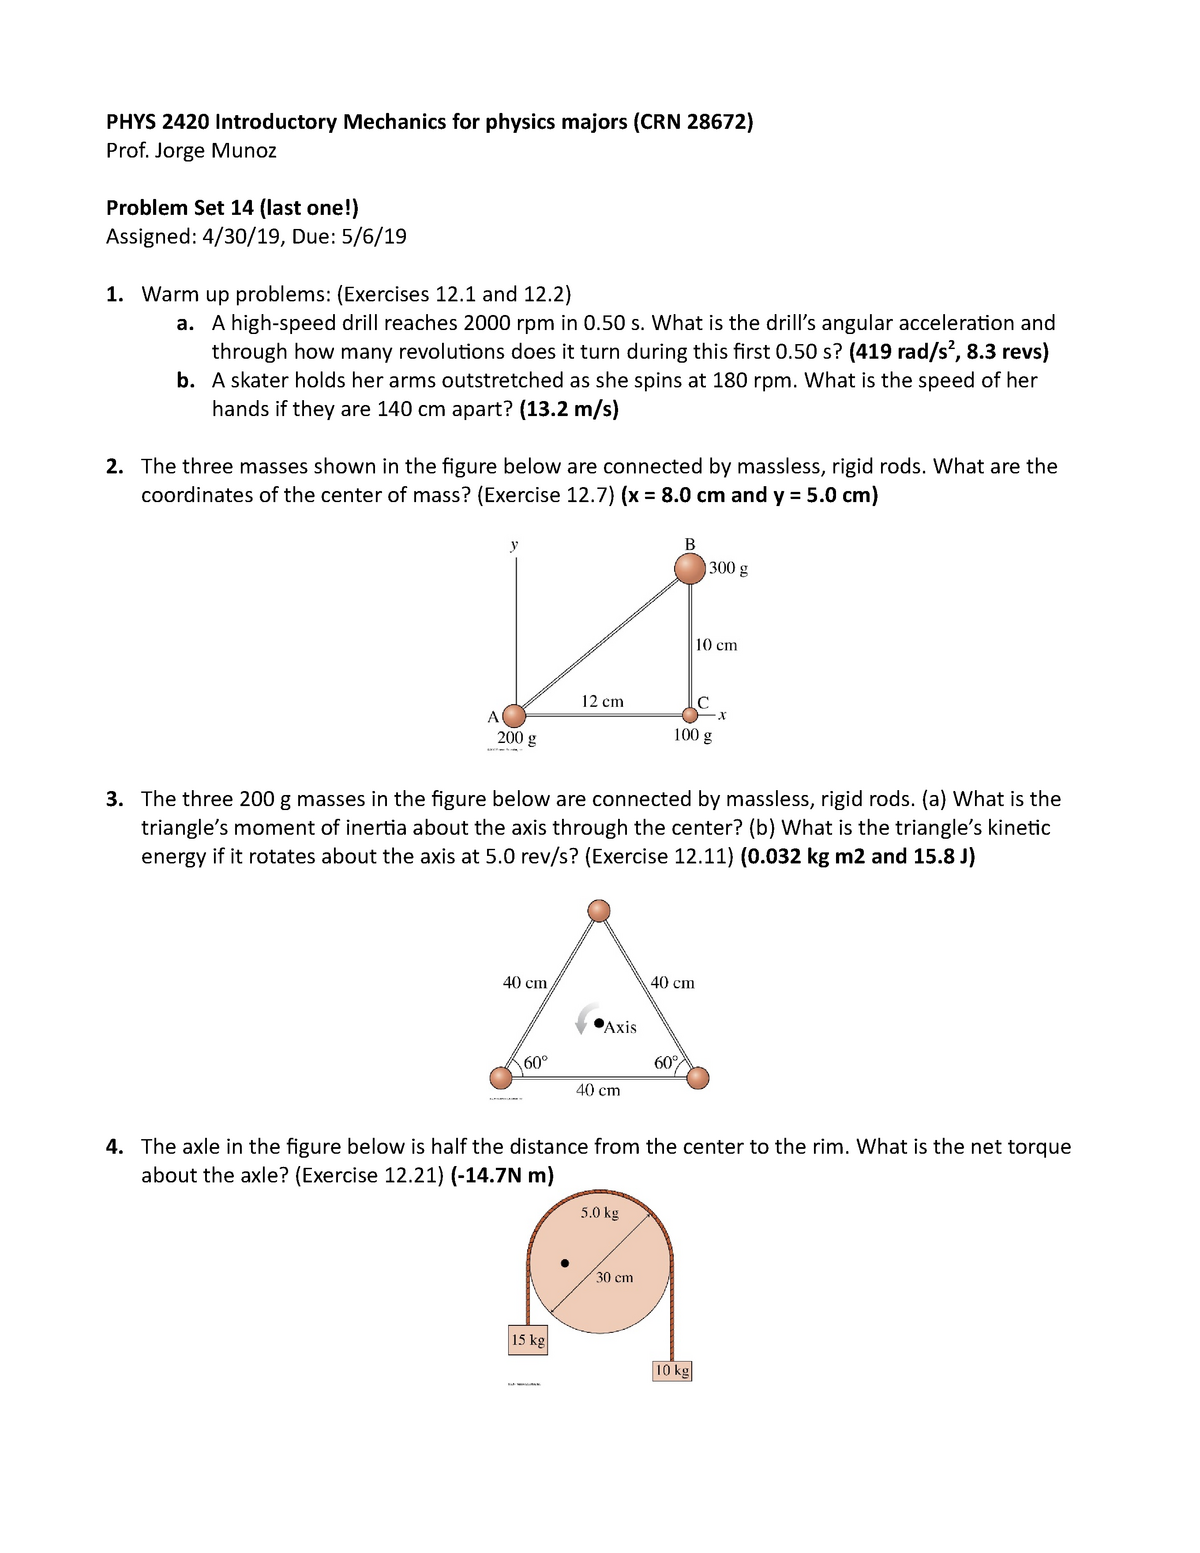 PHYS 2420 Problem Set 14 - PHYS 2420 Introductory Mechanics for